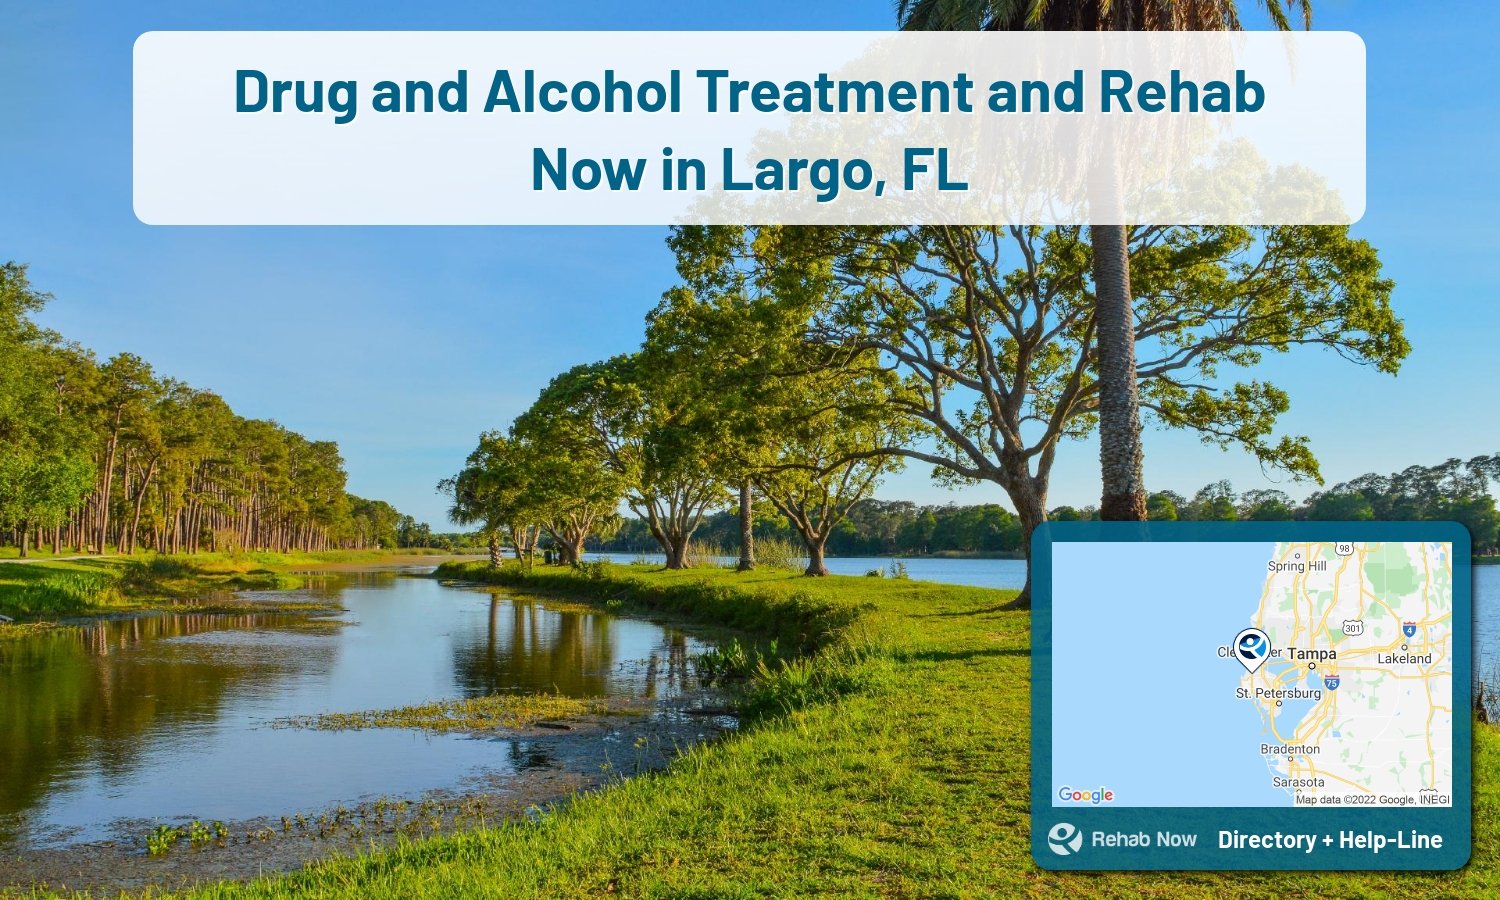 View options, availability, treatment methods, and more, for drug rehab and alcohol treatment in Largo, Florida